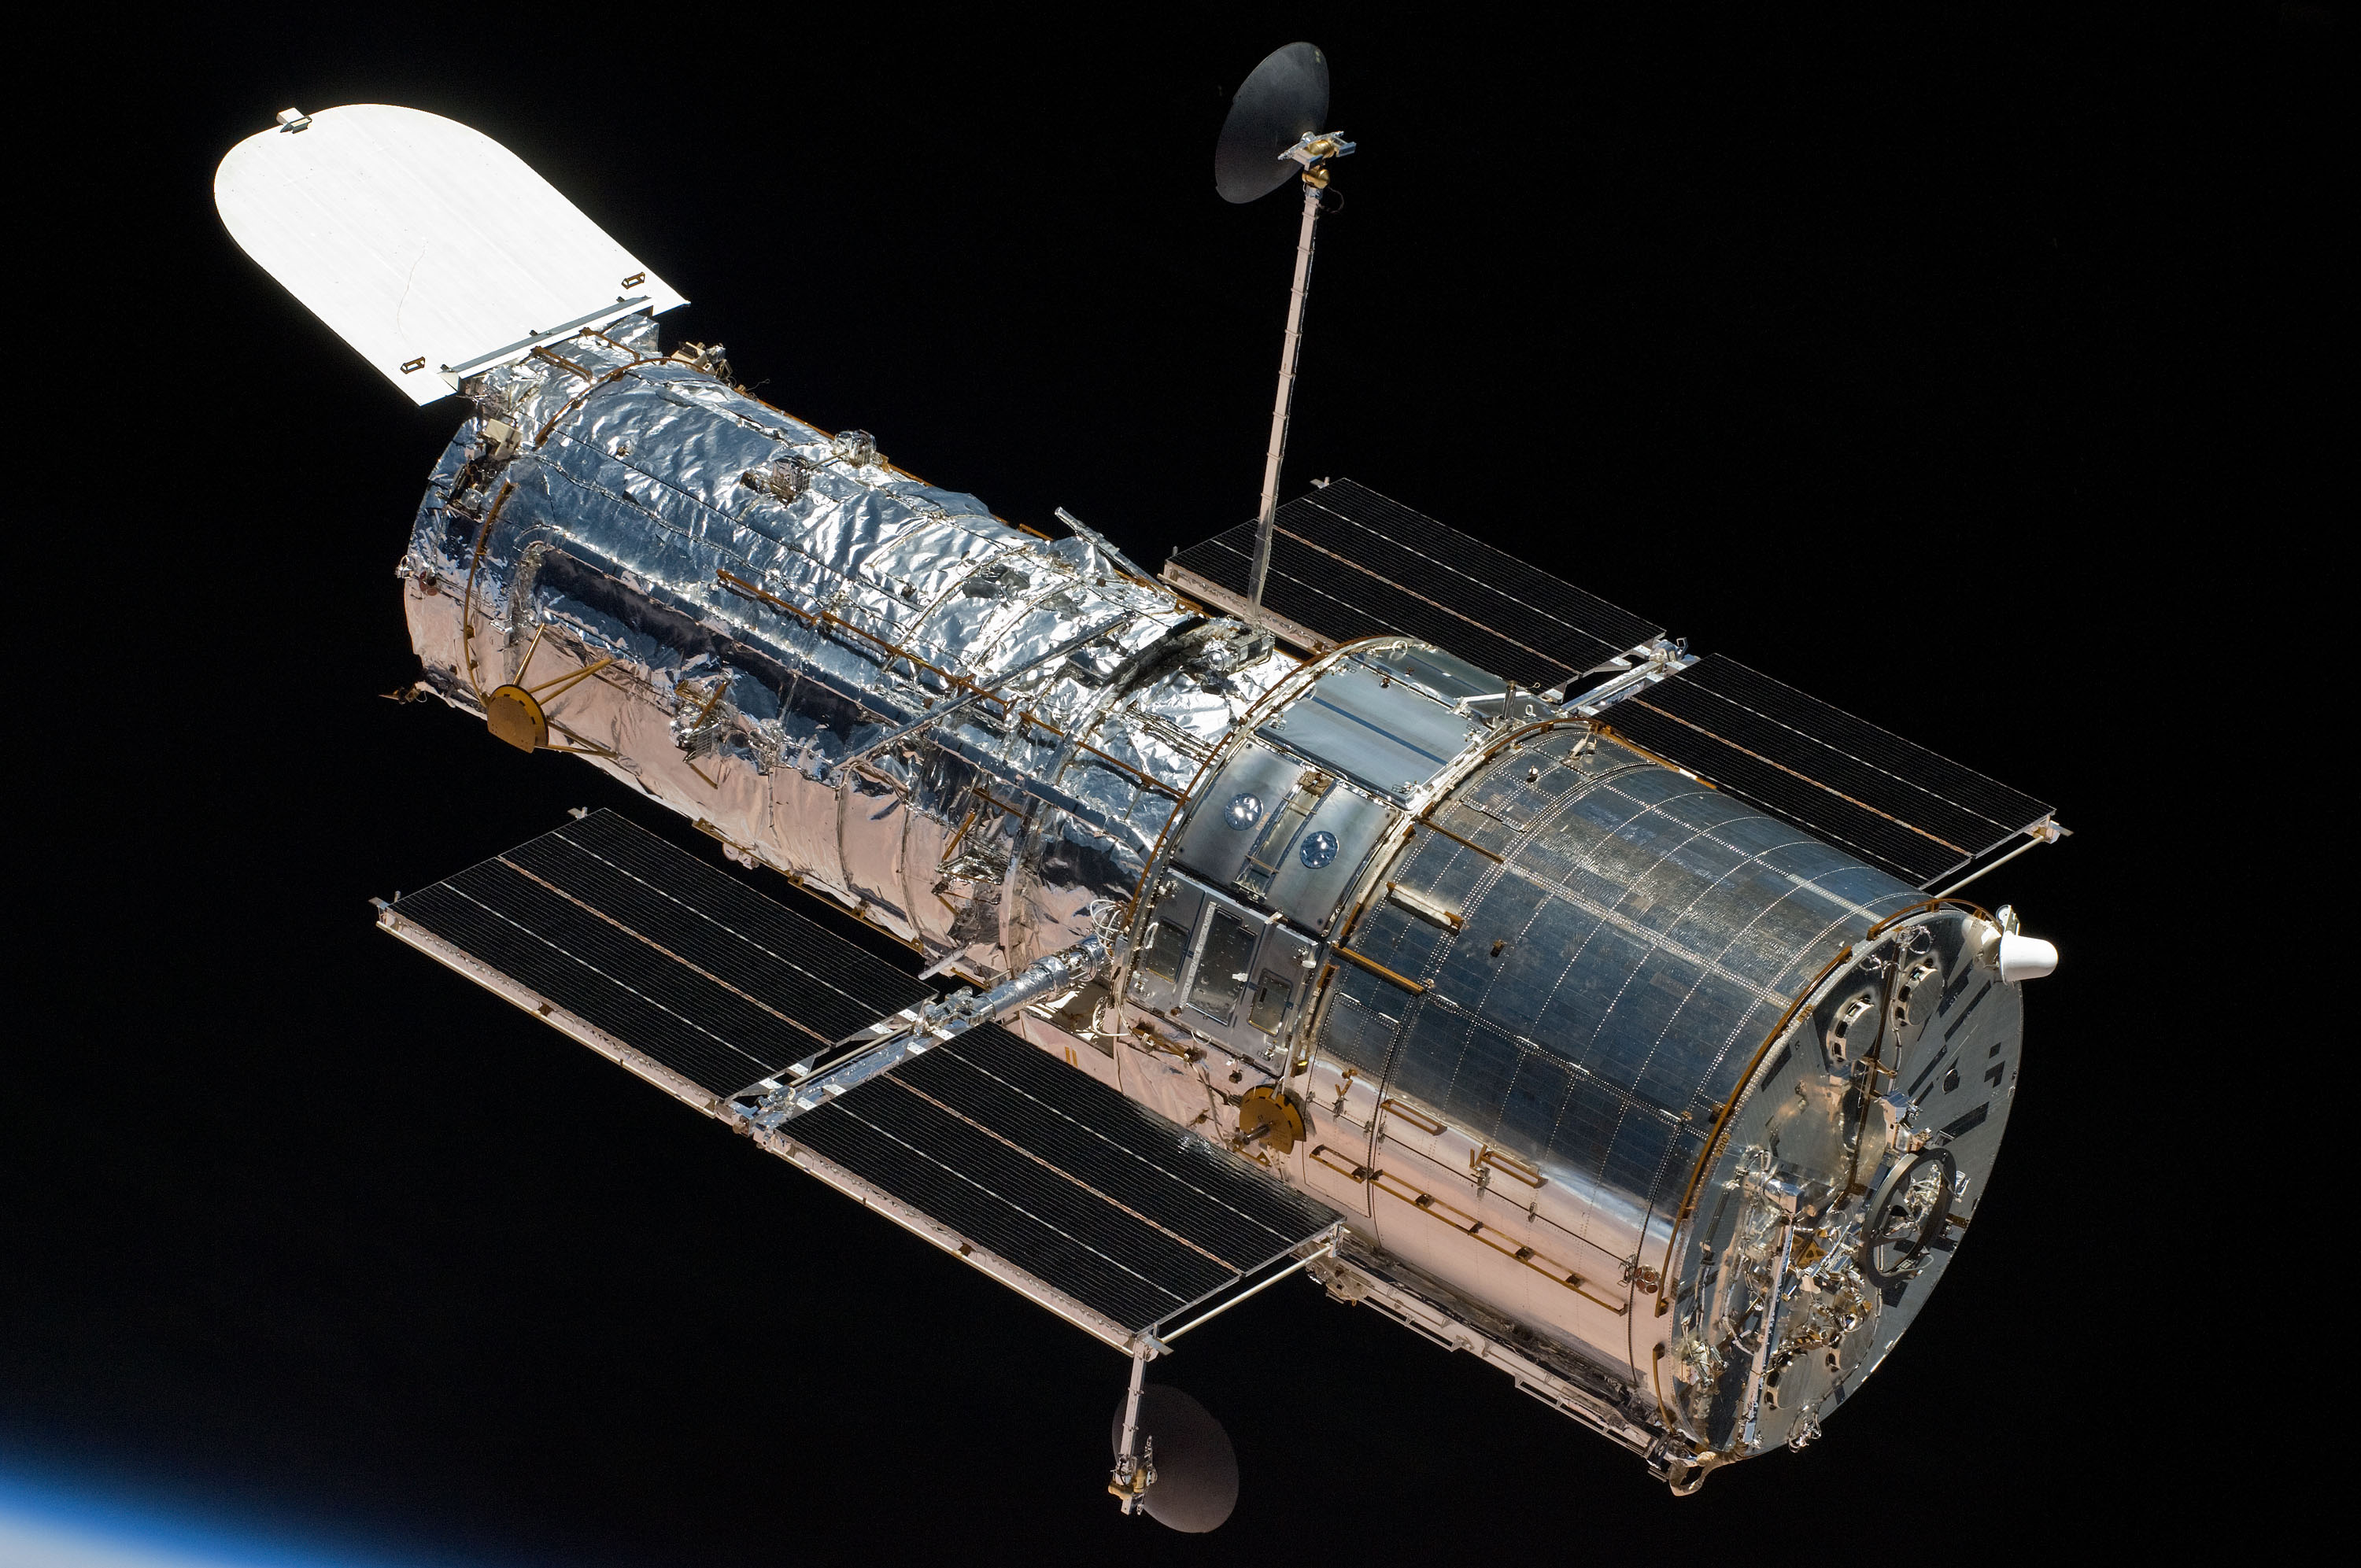 Hubble as it appeared after its release during the final servicing mission in 2009